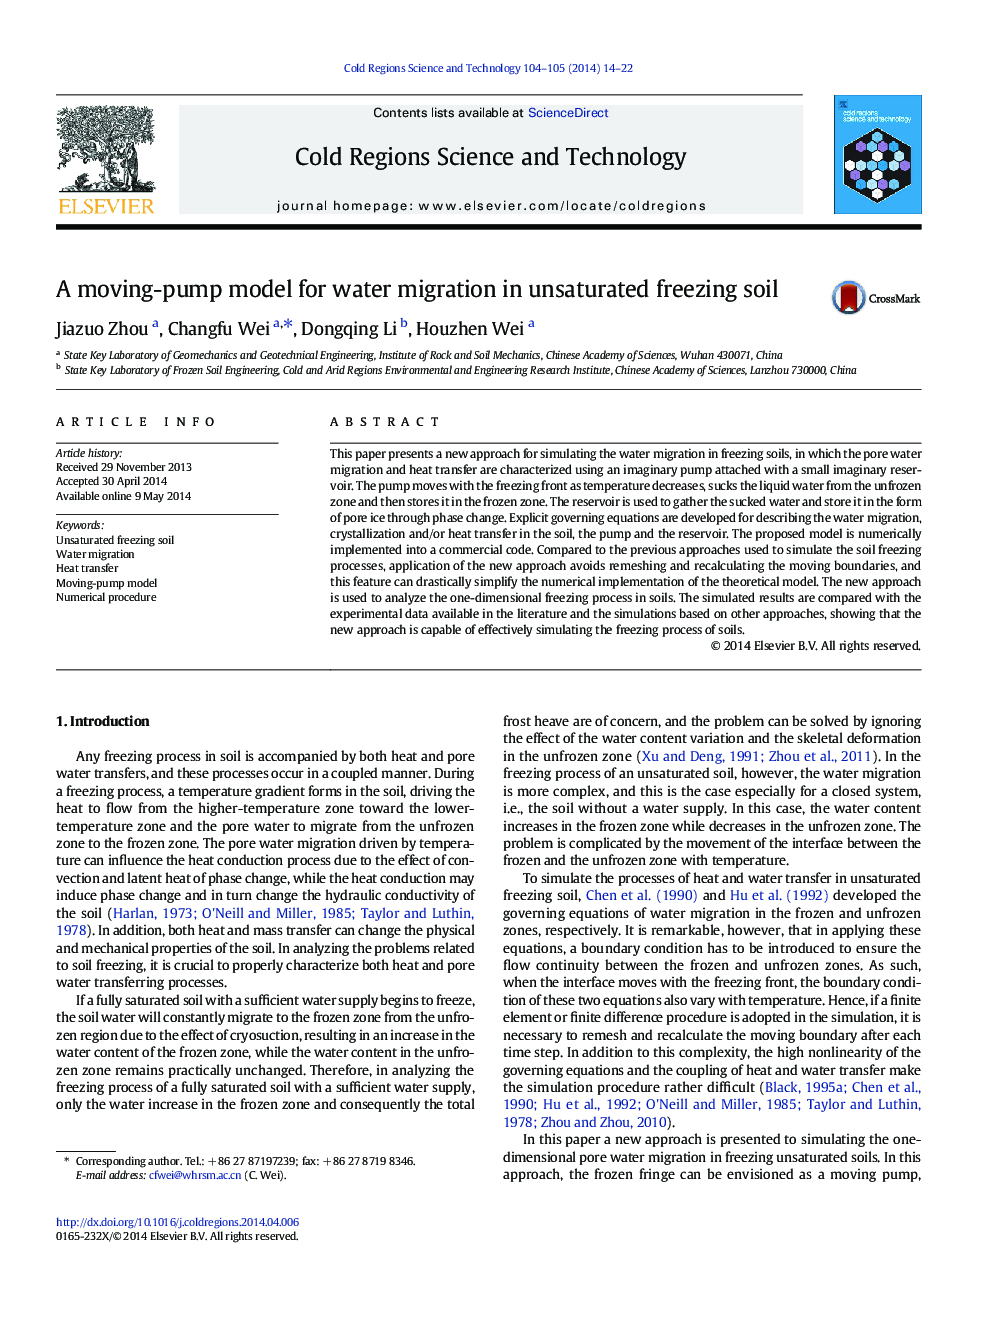 A moving-pump model for water migration in unsaturated freezing soil